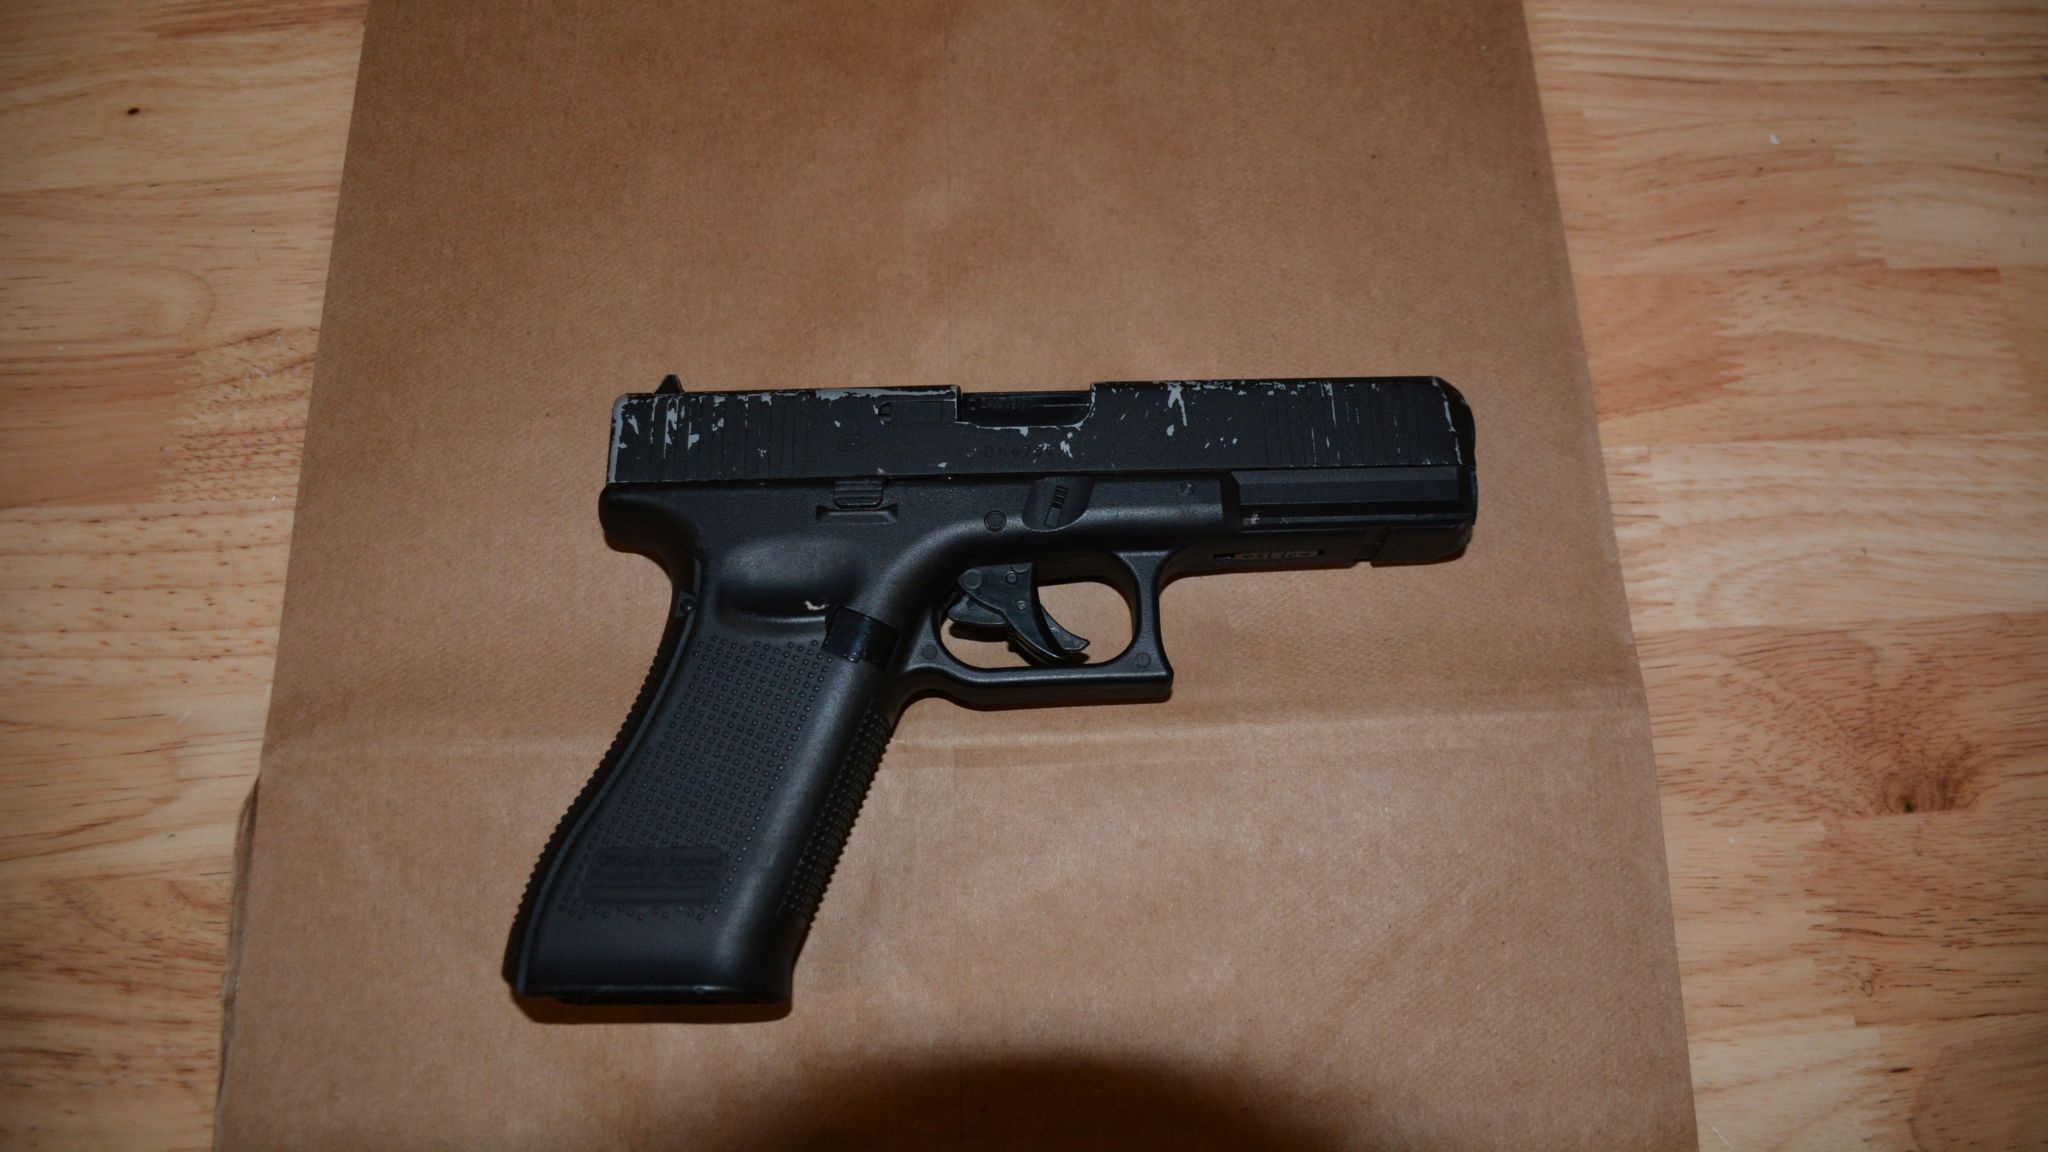 Police released image of the replica handgun recovered from the scene